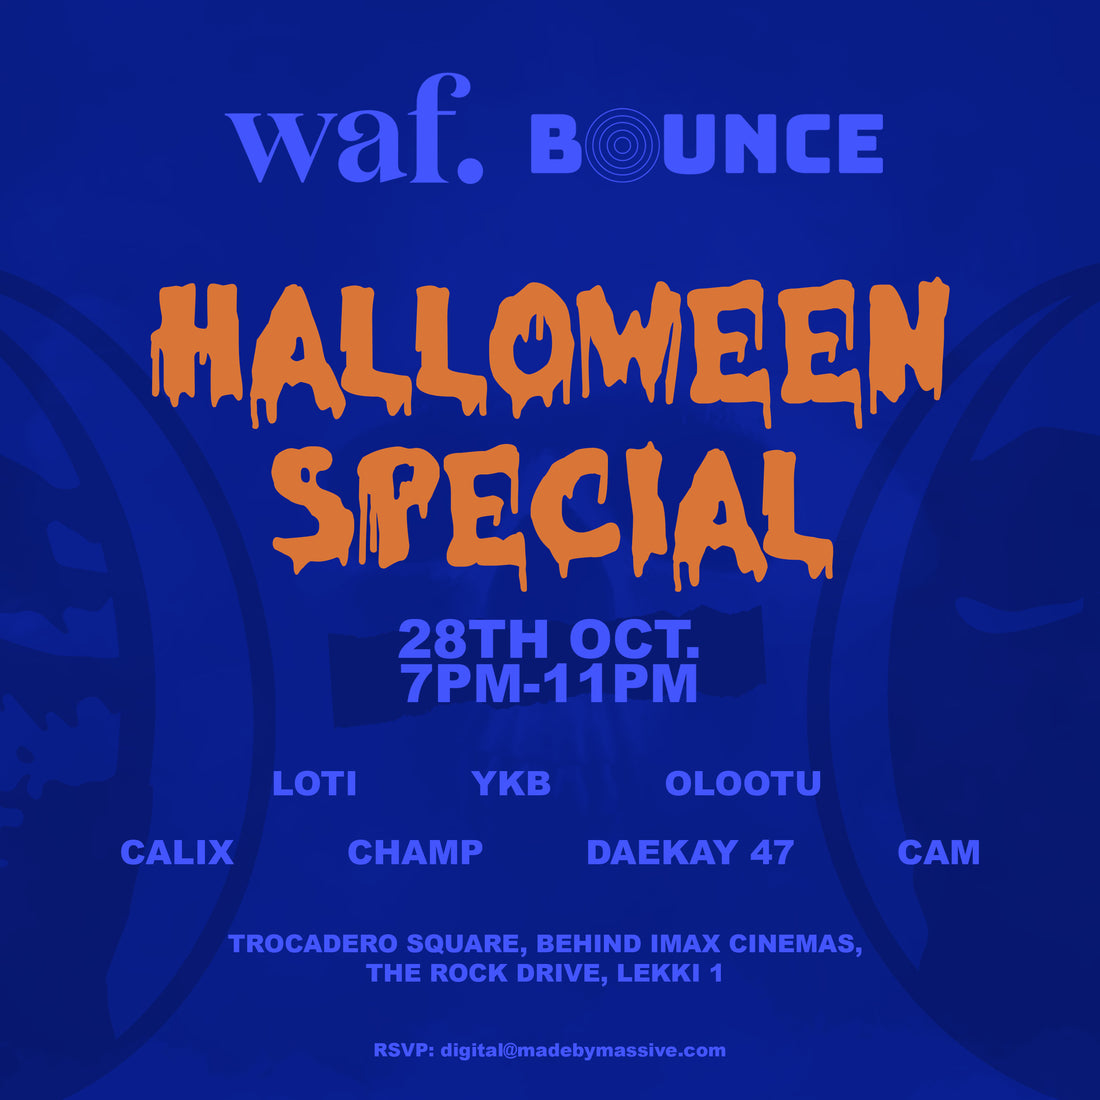 waf./Bounce Halloween Party